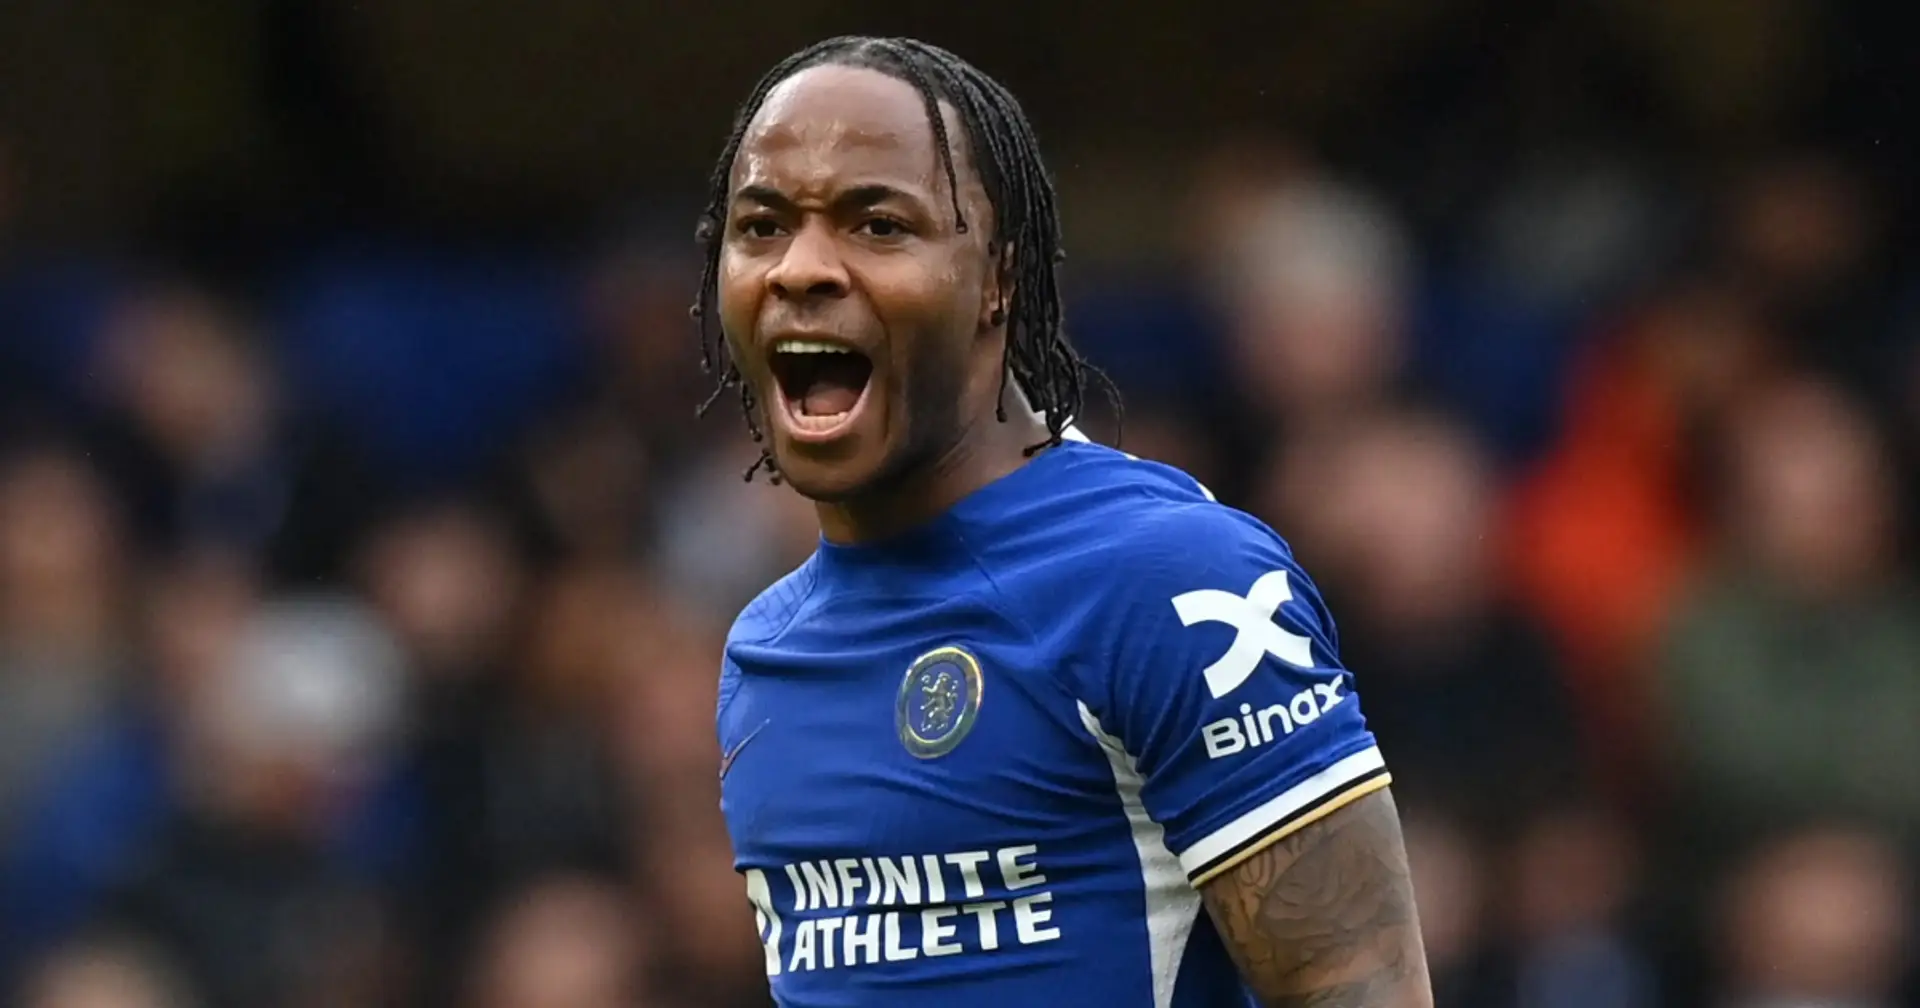 'The team should be a meritocracy': Chelsea fans voice their biggest issue with Raheem Sterling